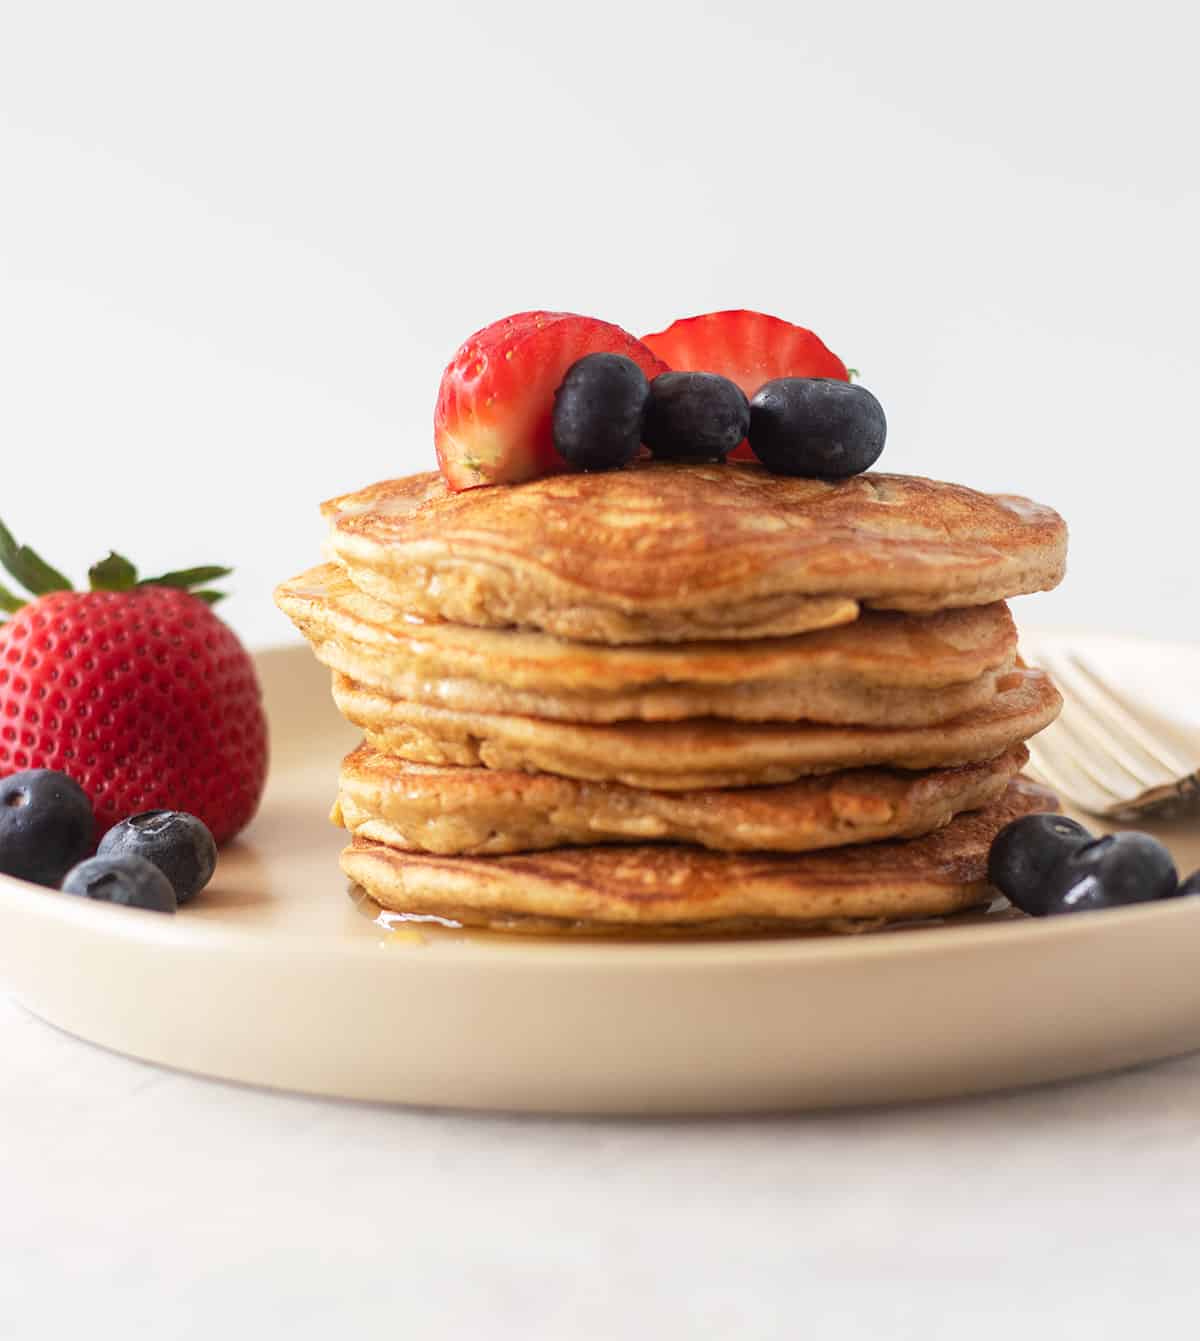 coconut flour pancakes stacked on a beige plate with fresh fruit.